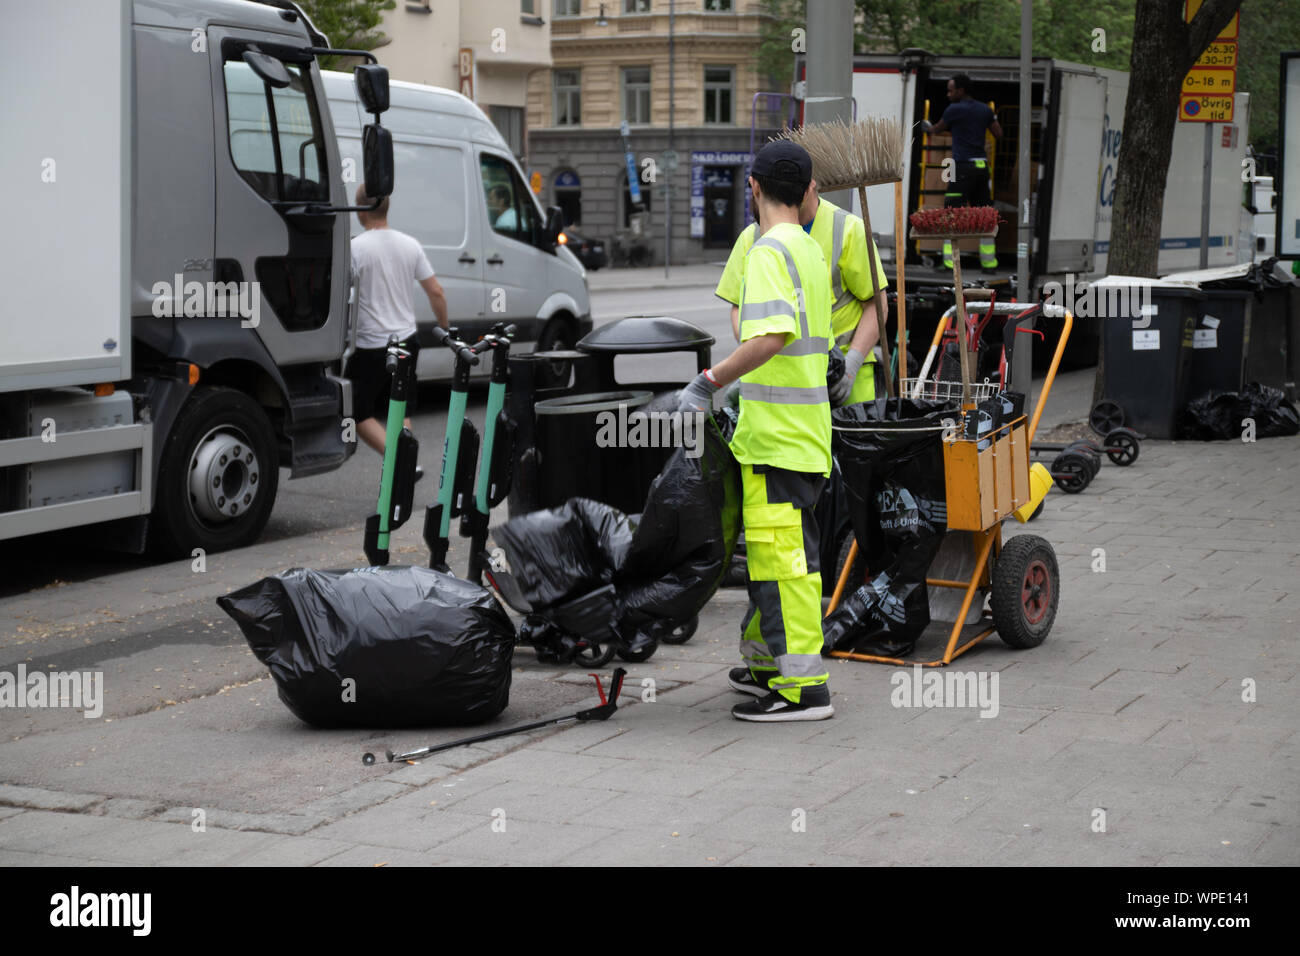 Stockholm, Sweden June 7 2019: Caring for ecology concept. Garbage sorting. Garbage collection worker putting bin into waste truck. For removal Stock Photo